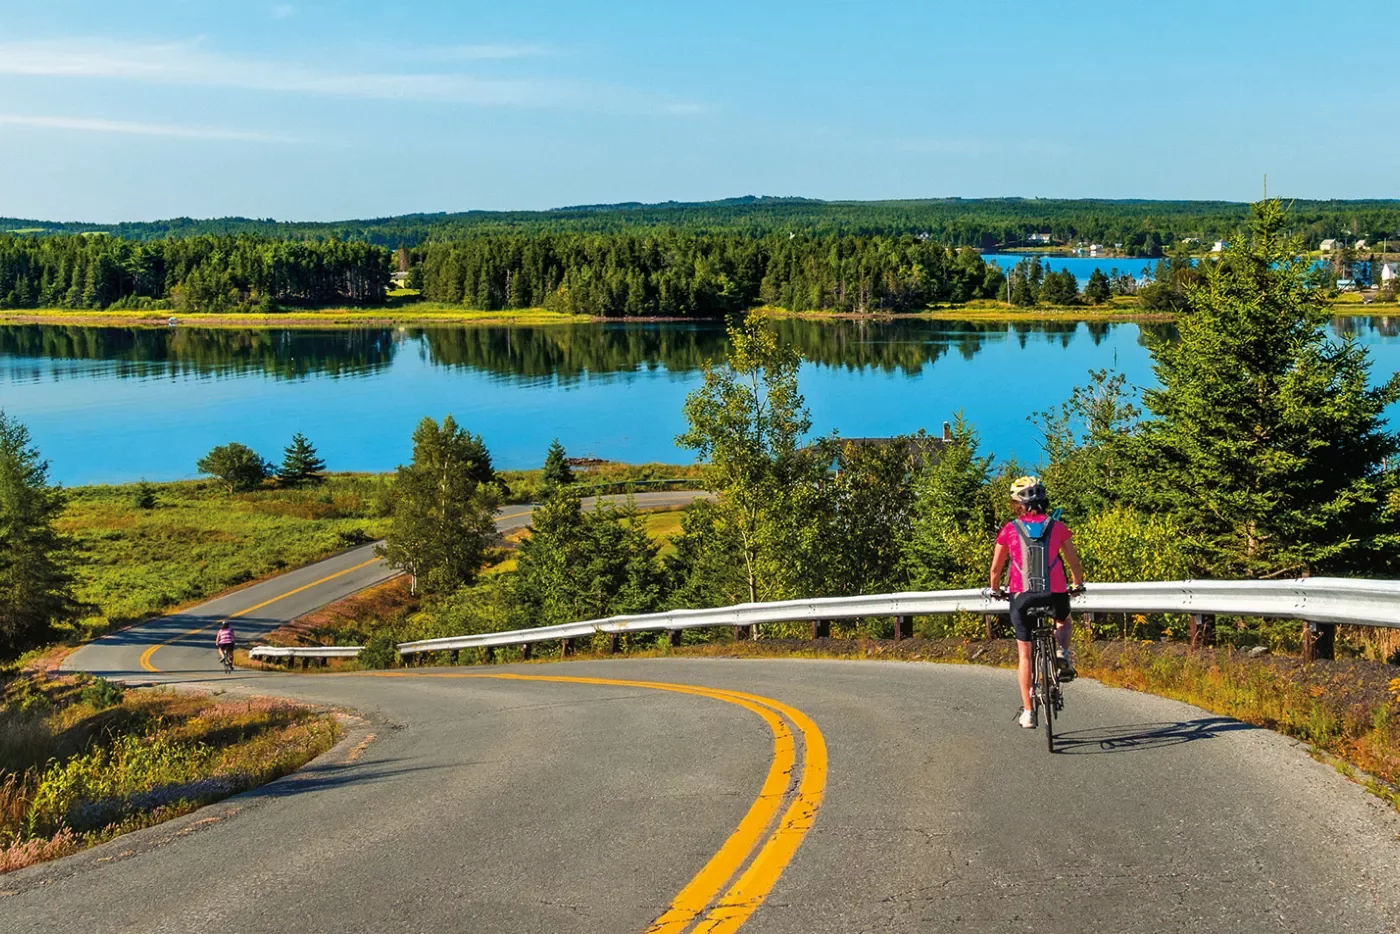 Guest cycling down road, large lake or river in background.